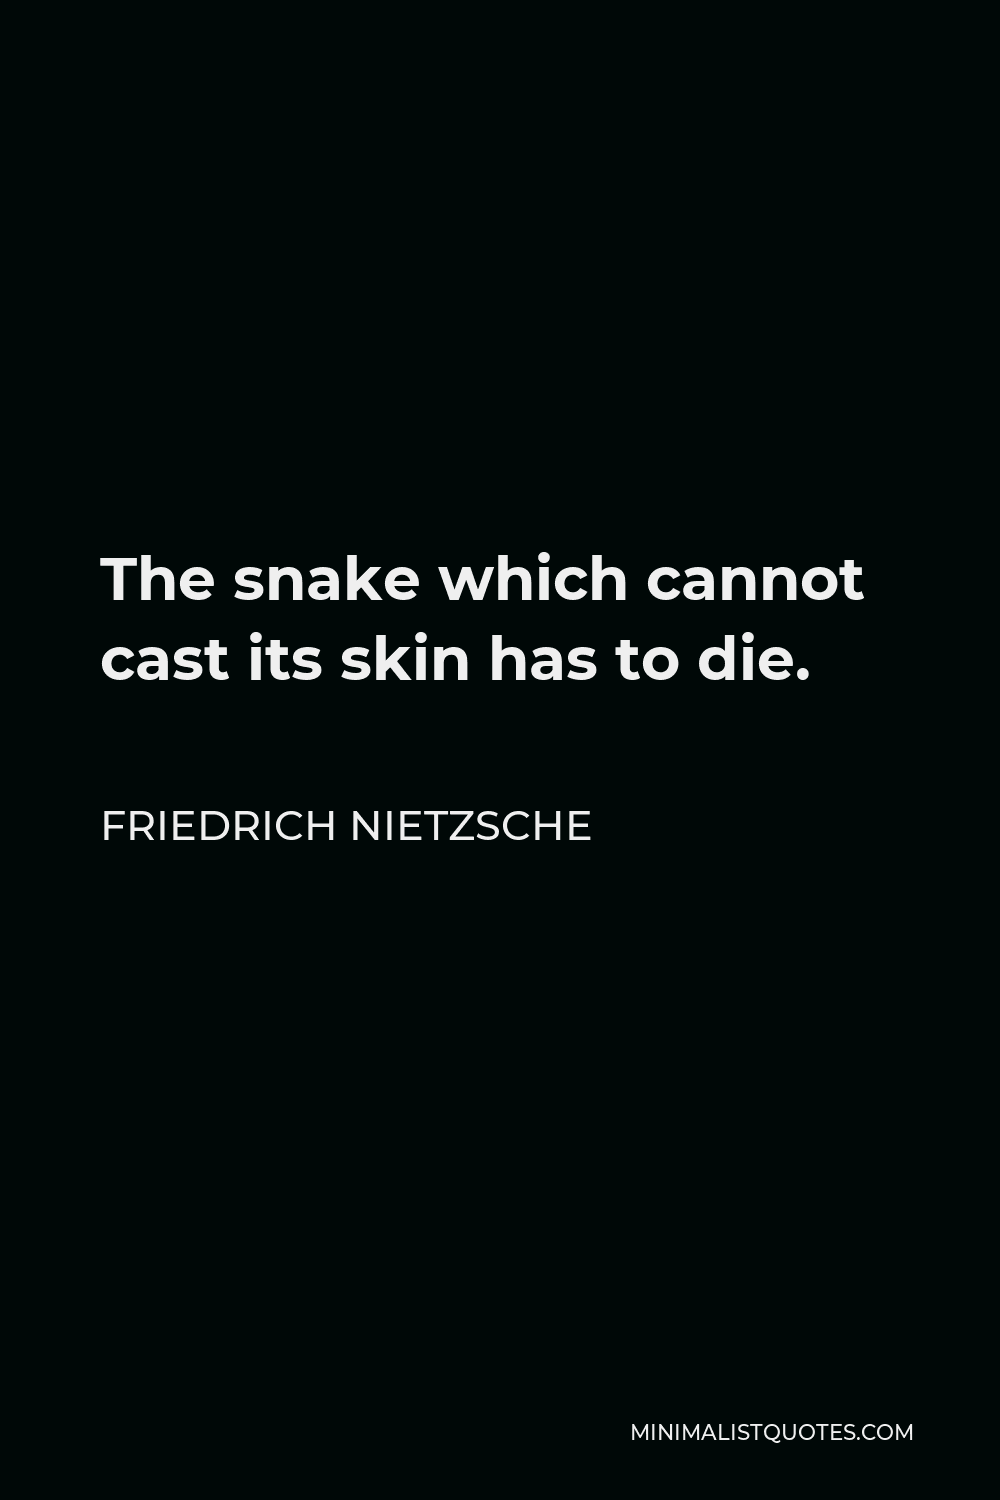 Friedrich Nietzsche Quote - The snake which cannot cast its skin has to die.